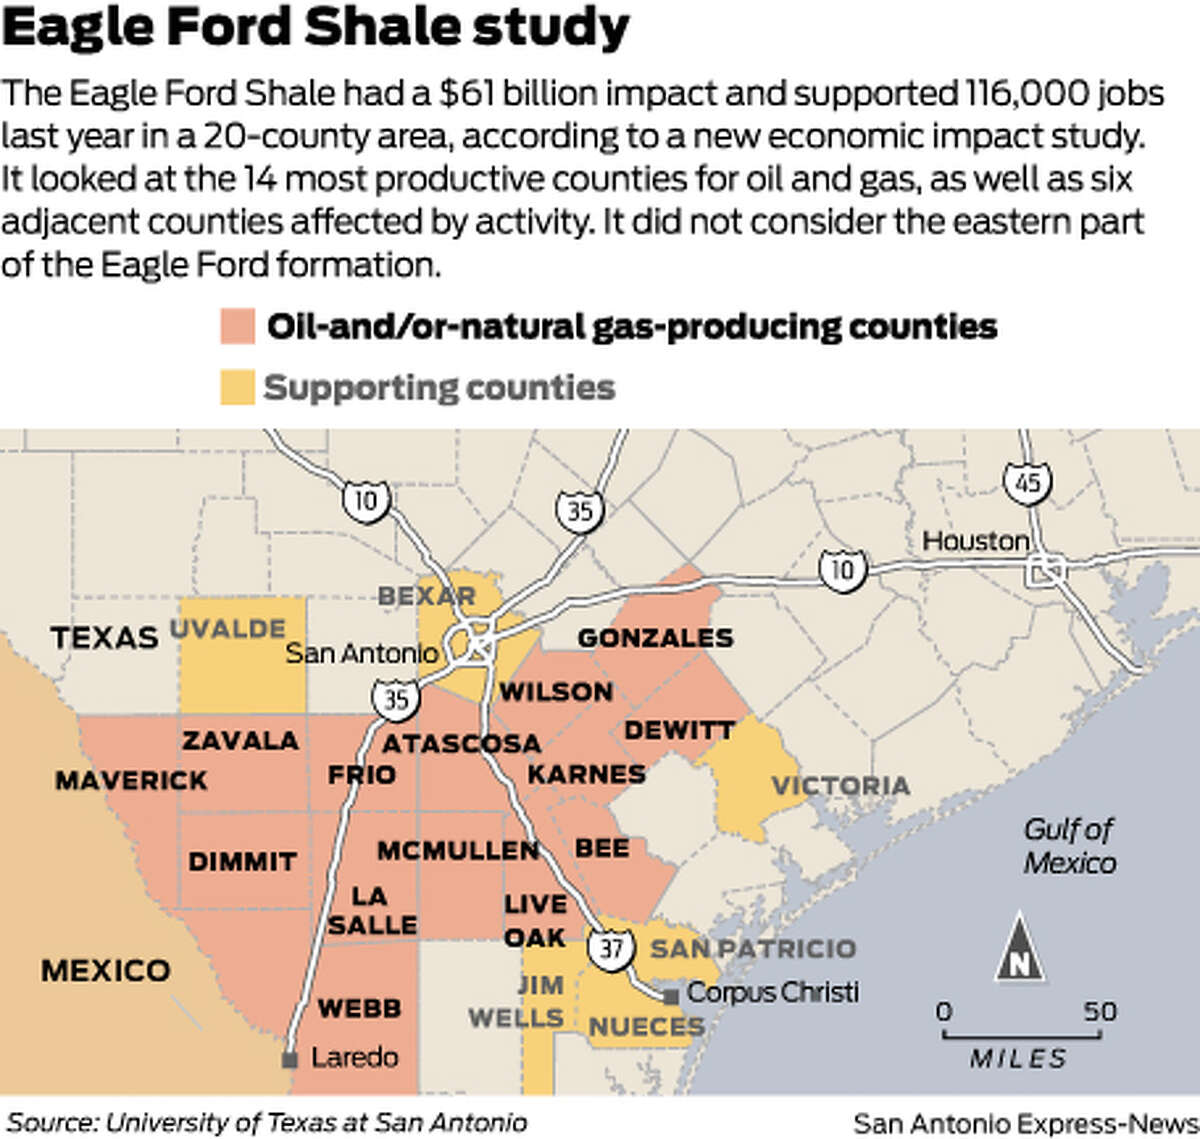 The Eagle Ford Shale had a $61 billion impact and supported 116,000 jobs last year in a 20-county area, according to a new economic impact study. It looked at the 14 most productive counties for oil and gas, as well as six adjacent counties affected by activity. It did not consider the eastern part of the Eagle Ford formation.